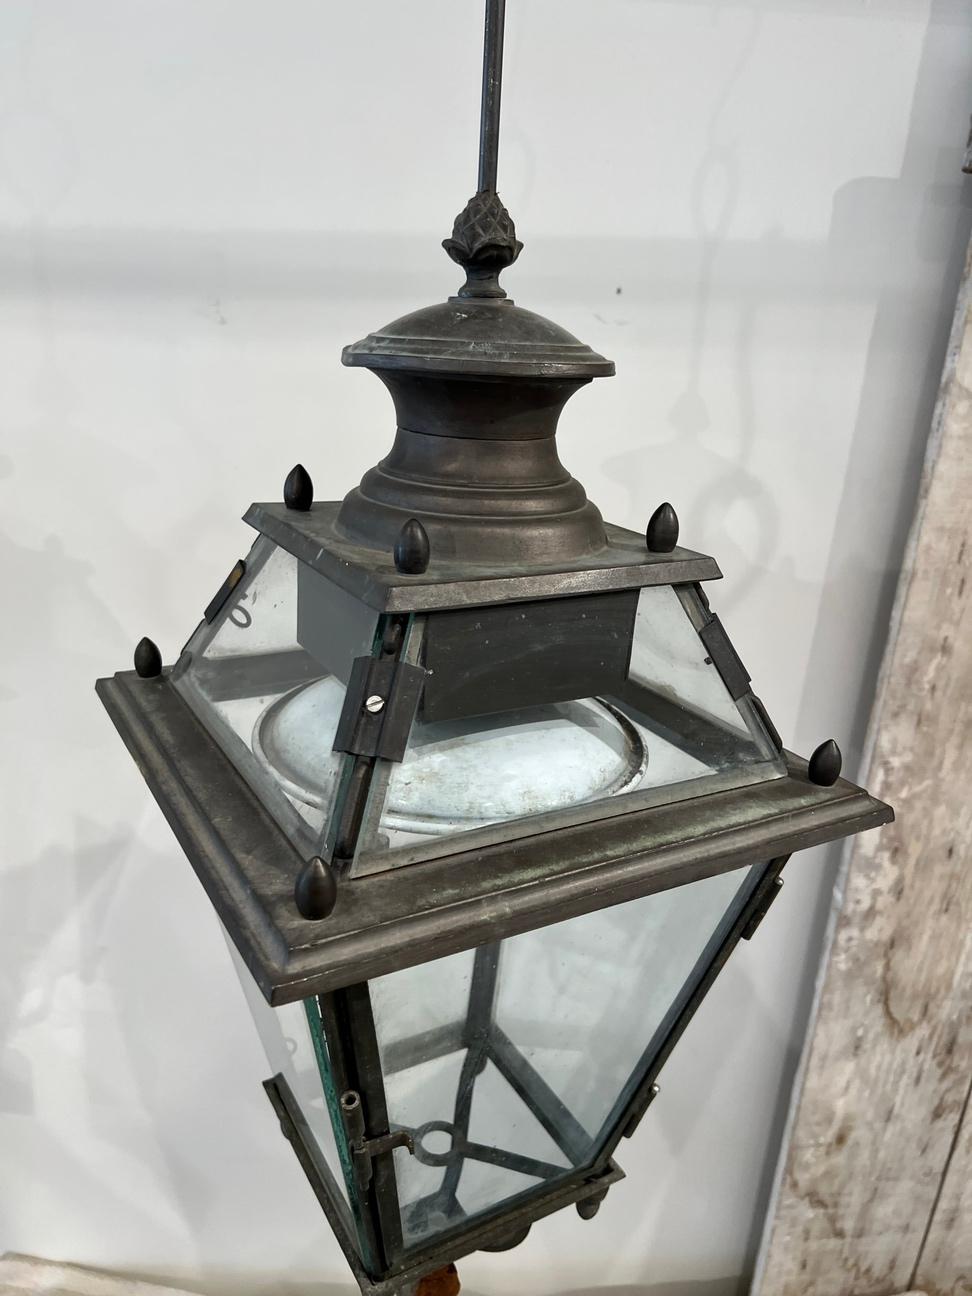 These lanterns were created in Genoa, which has a famous landmark, Lanterna di Genova (Lighthouse of Genoa); many consider this lighthouse to be a symbol of the city. These lanterns would look regal in front of your home. 
Must be rewired for US